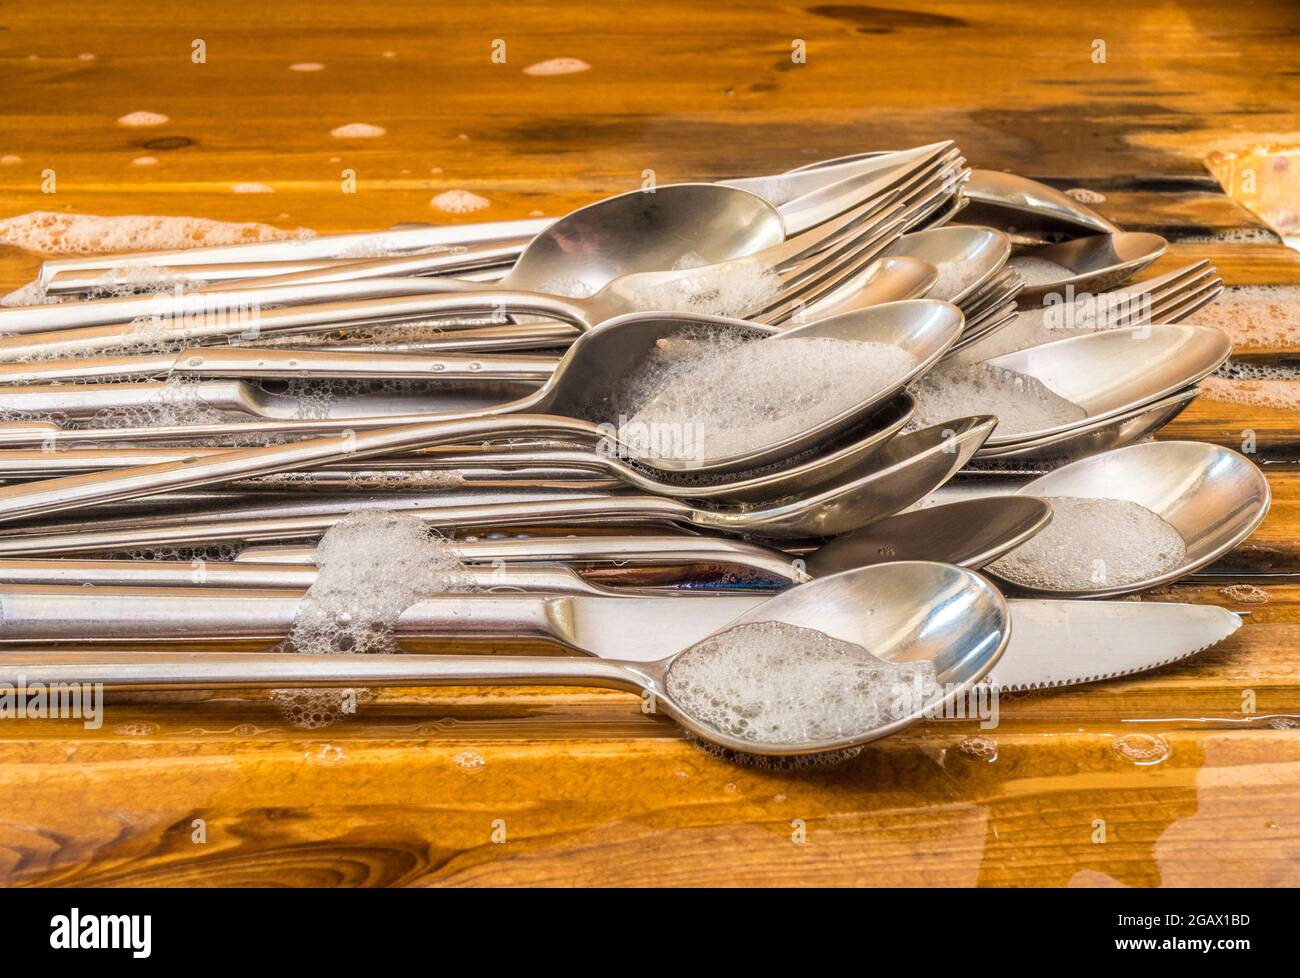 Closeup POV shot of soapy washed steel cutlery plled up on a wooden sink draining board. Stock Photo